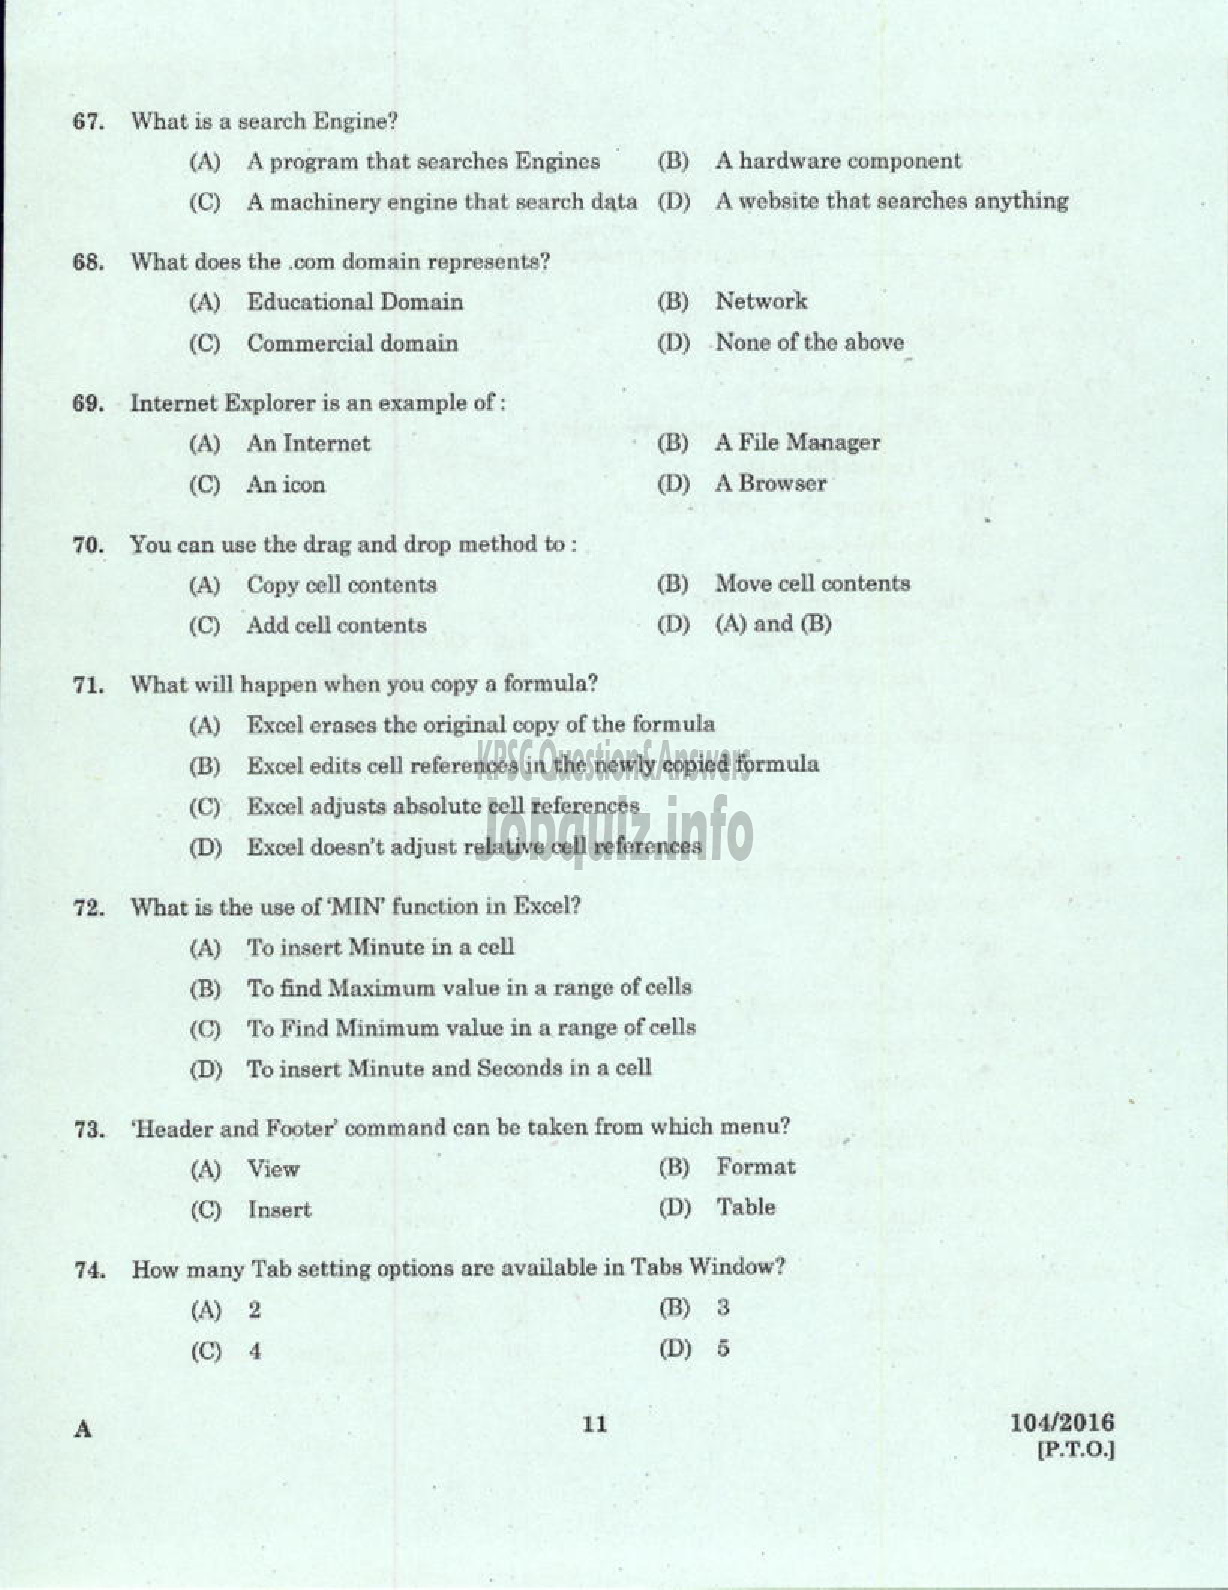 Kerala PSC Question Paper - CONFIDENTIAL ASSISTANT GR II VARIOUS/ GOVT OWNED COMPANY/CORPORATIONS/BOARDS-9